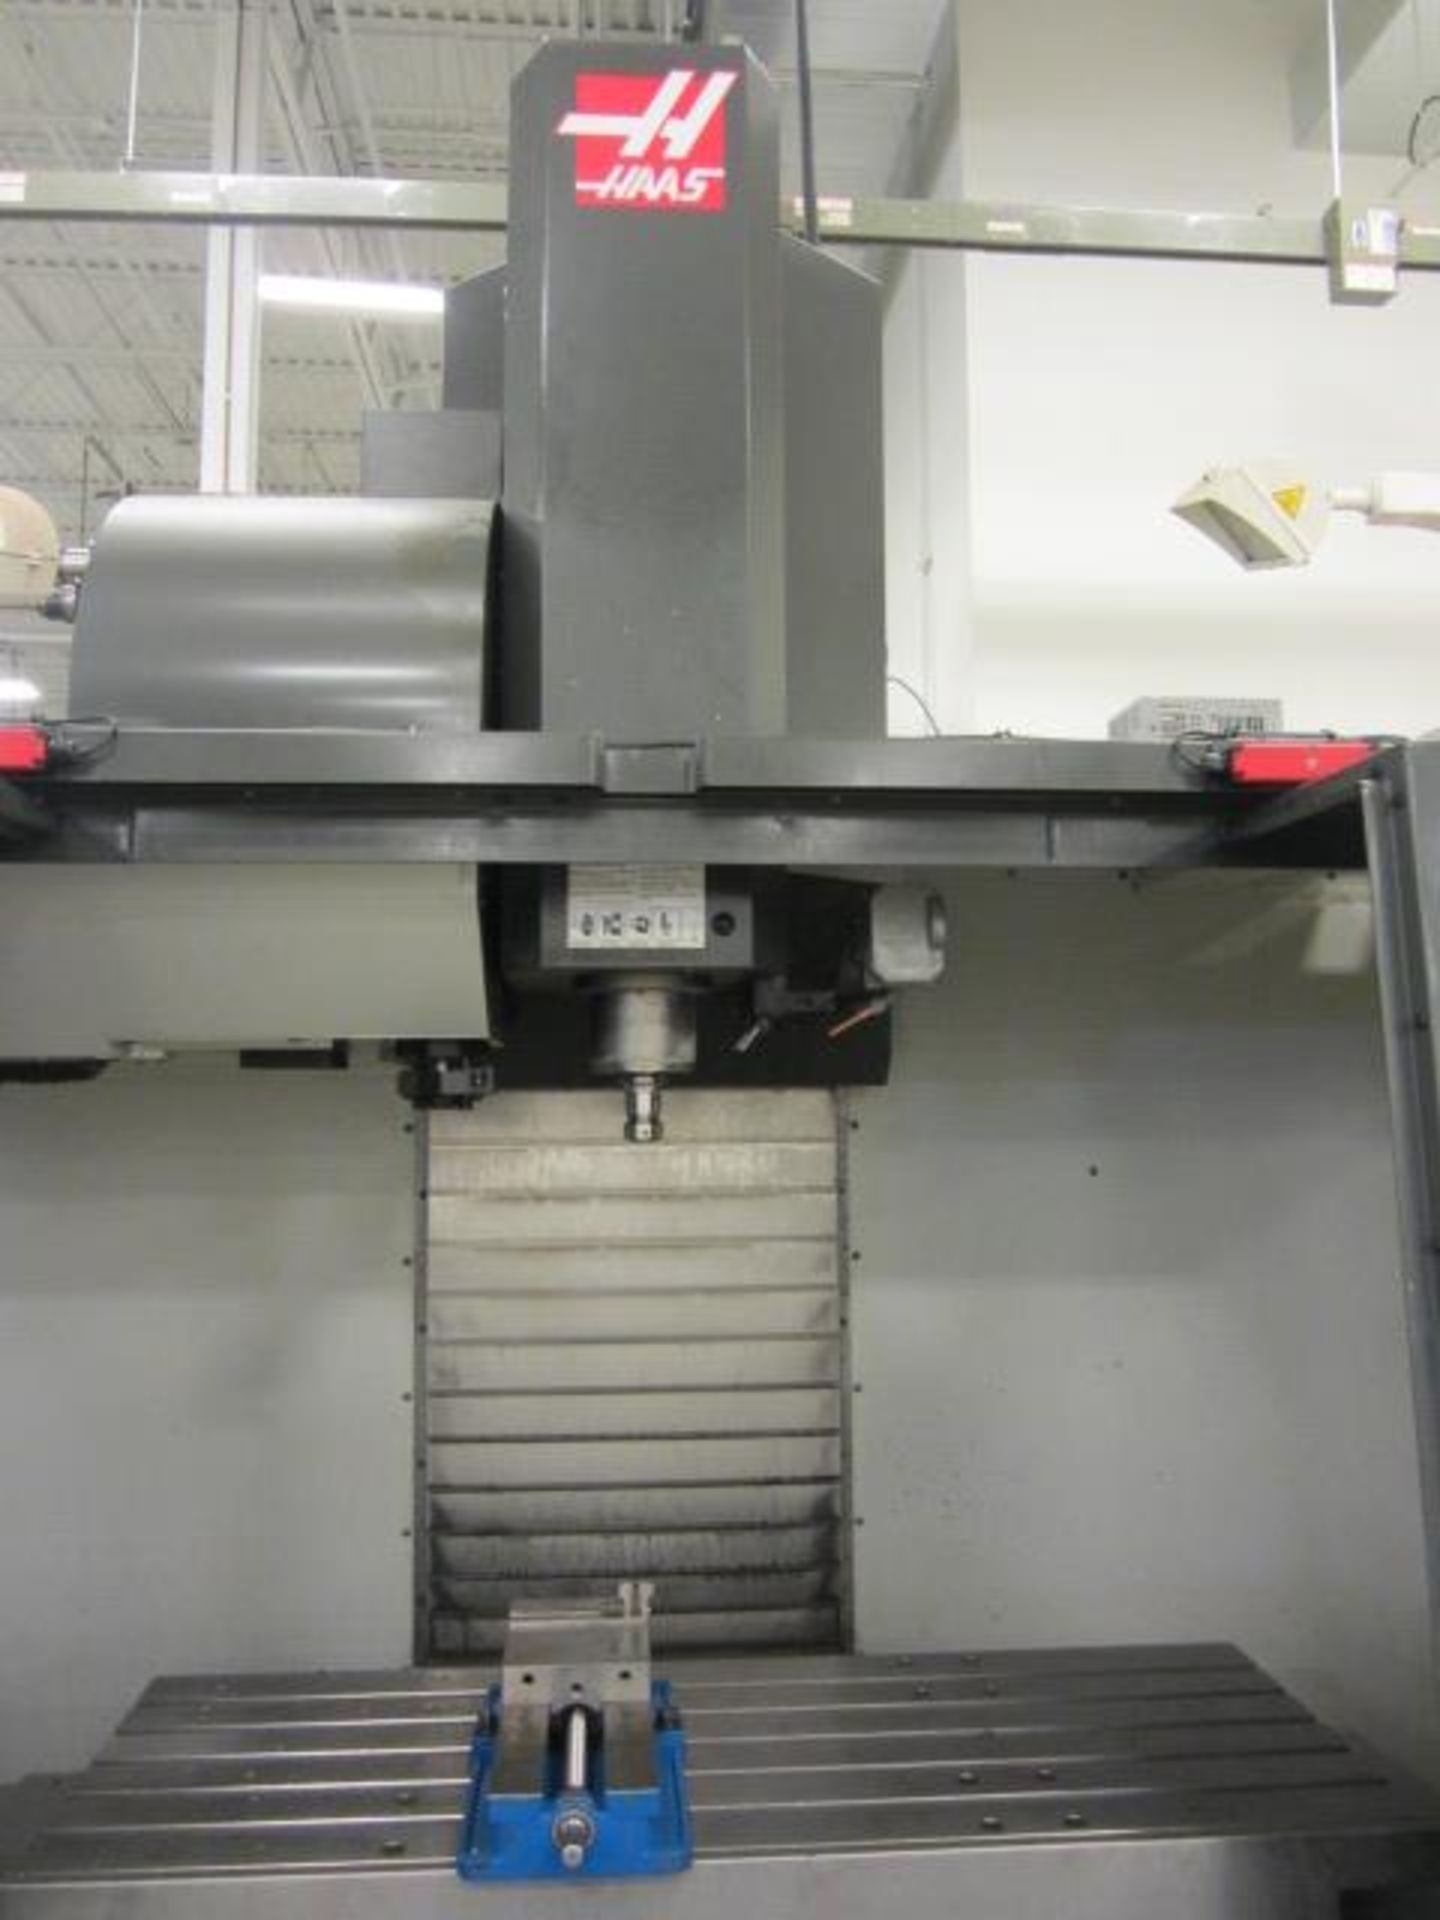 Haas VF-4 CNC Vertical Machining Center with 52'' x 18'' Table, #40 Taper Spindle Speeds to 8100 - Image 9 of 9